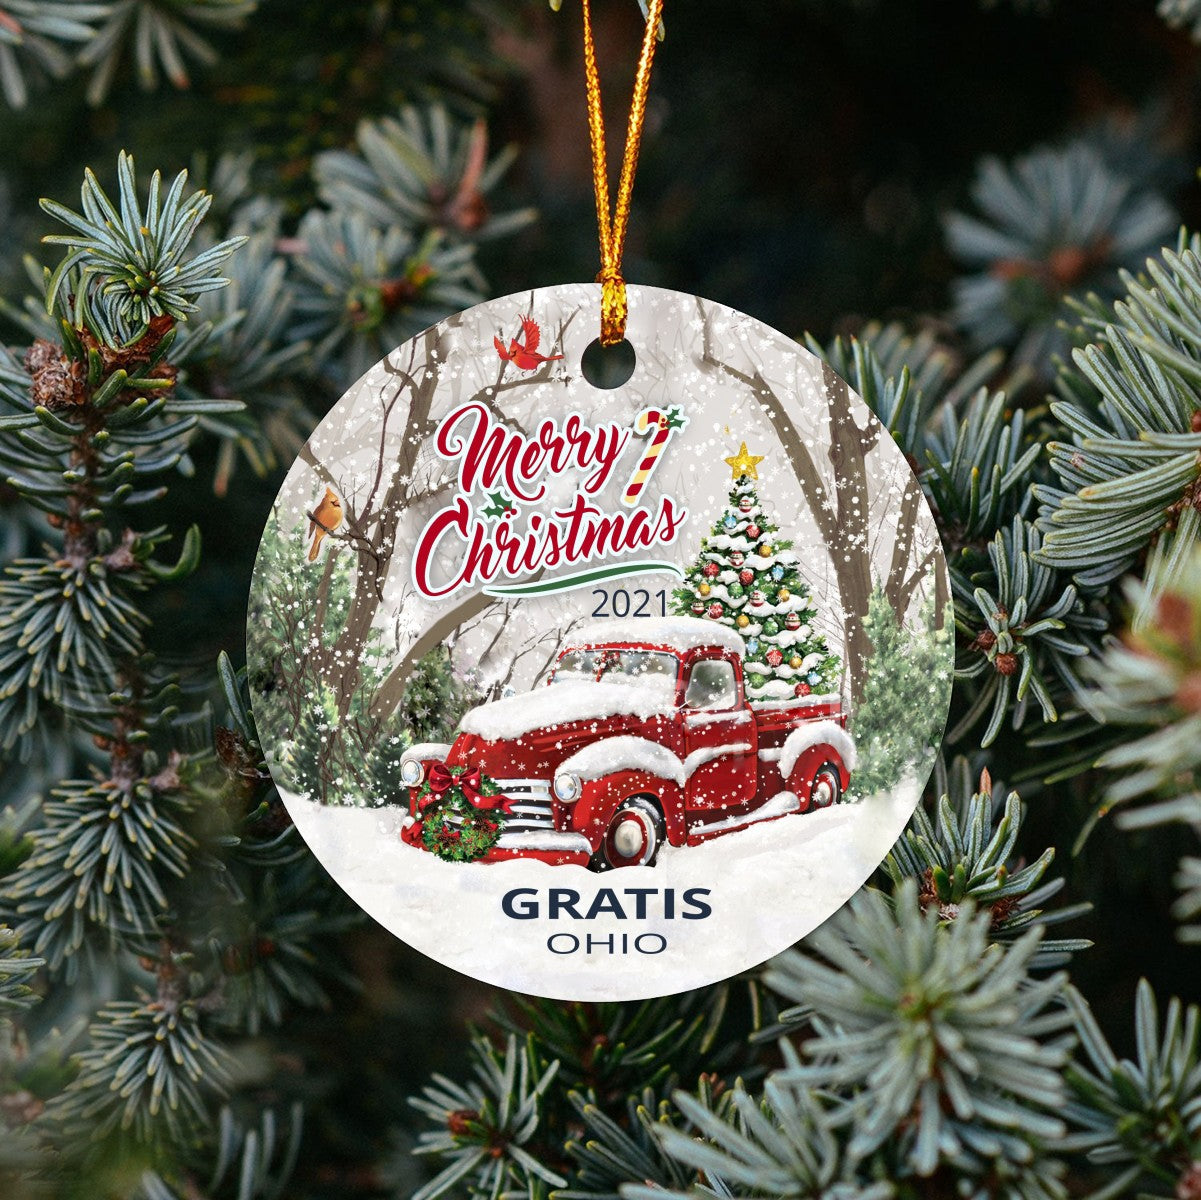 Christmas Tree Ornaments Gratis - Ornament With Name City, State Gratis Ohio OH Ornament - Red Truck Xmas Ornaments 3'' Plastic Gift For Family, Friend And Housewarming